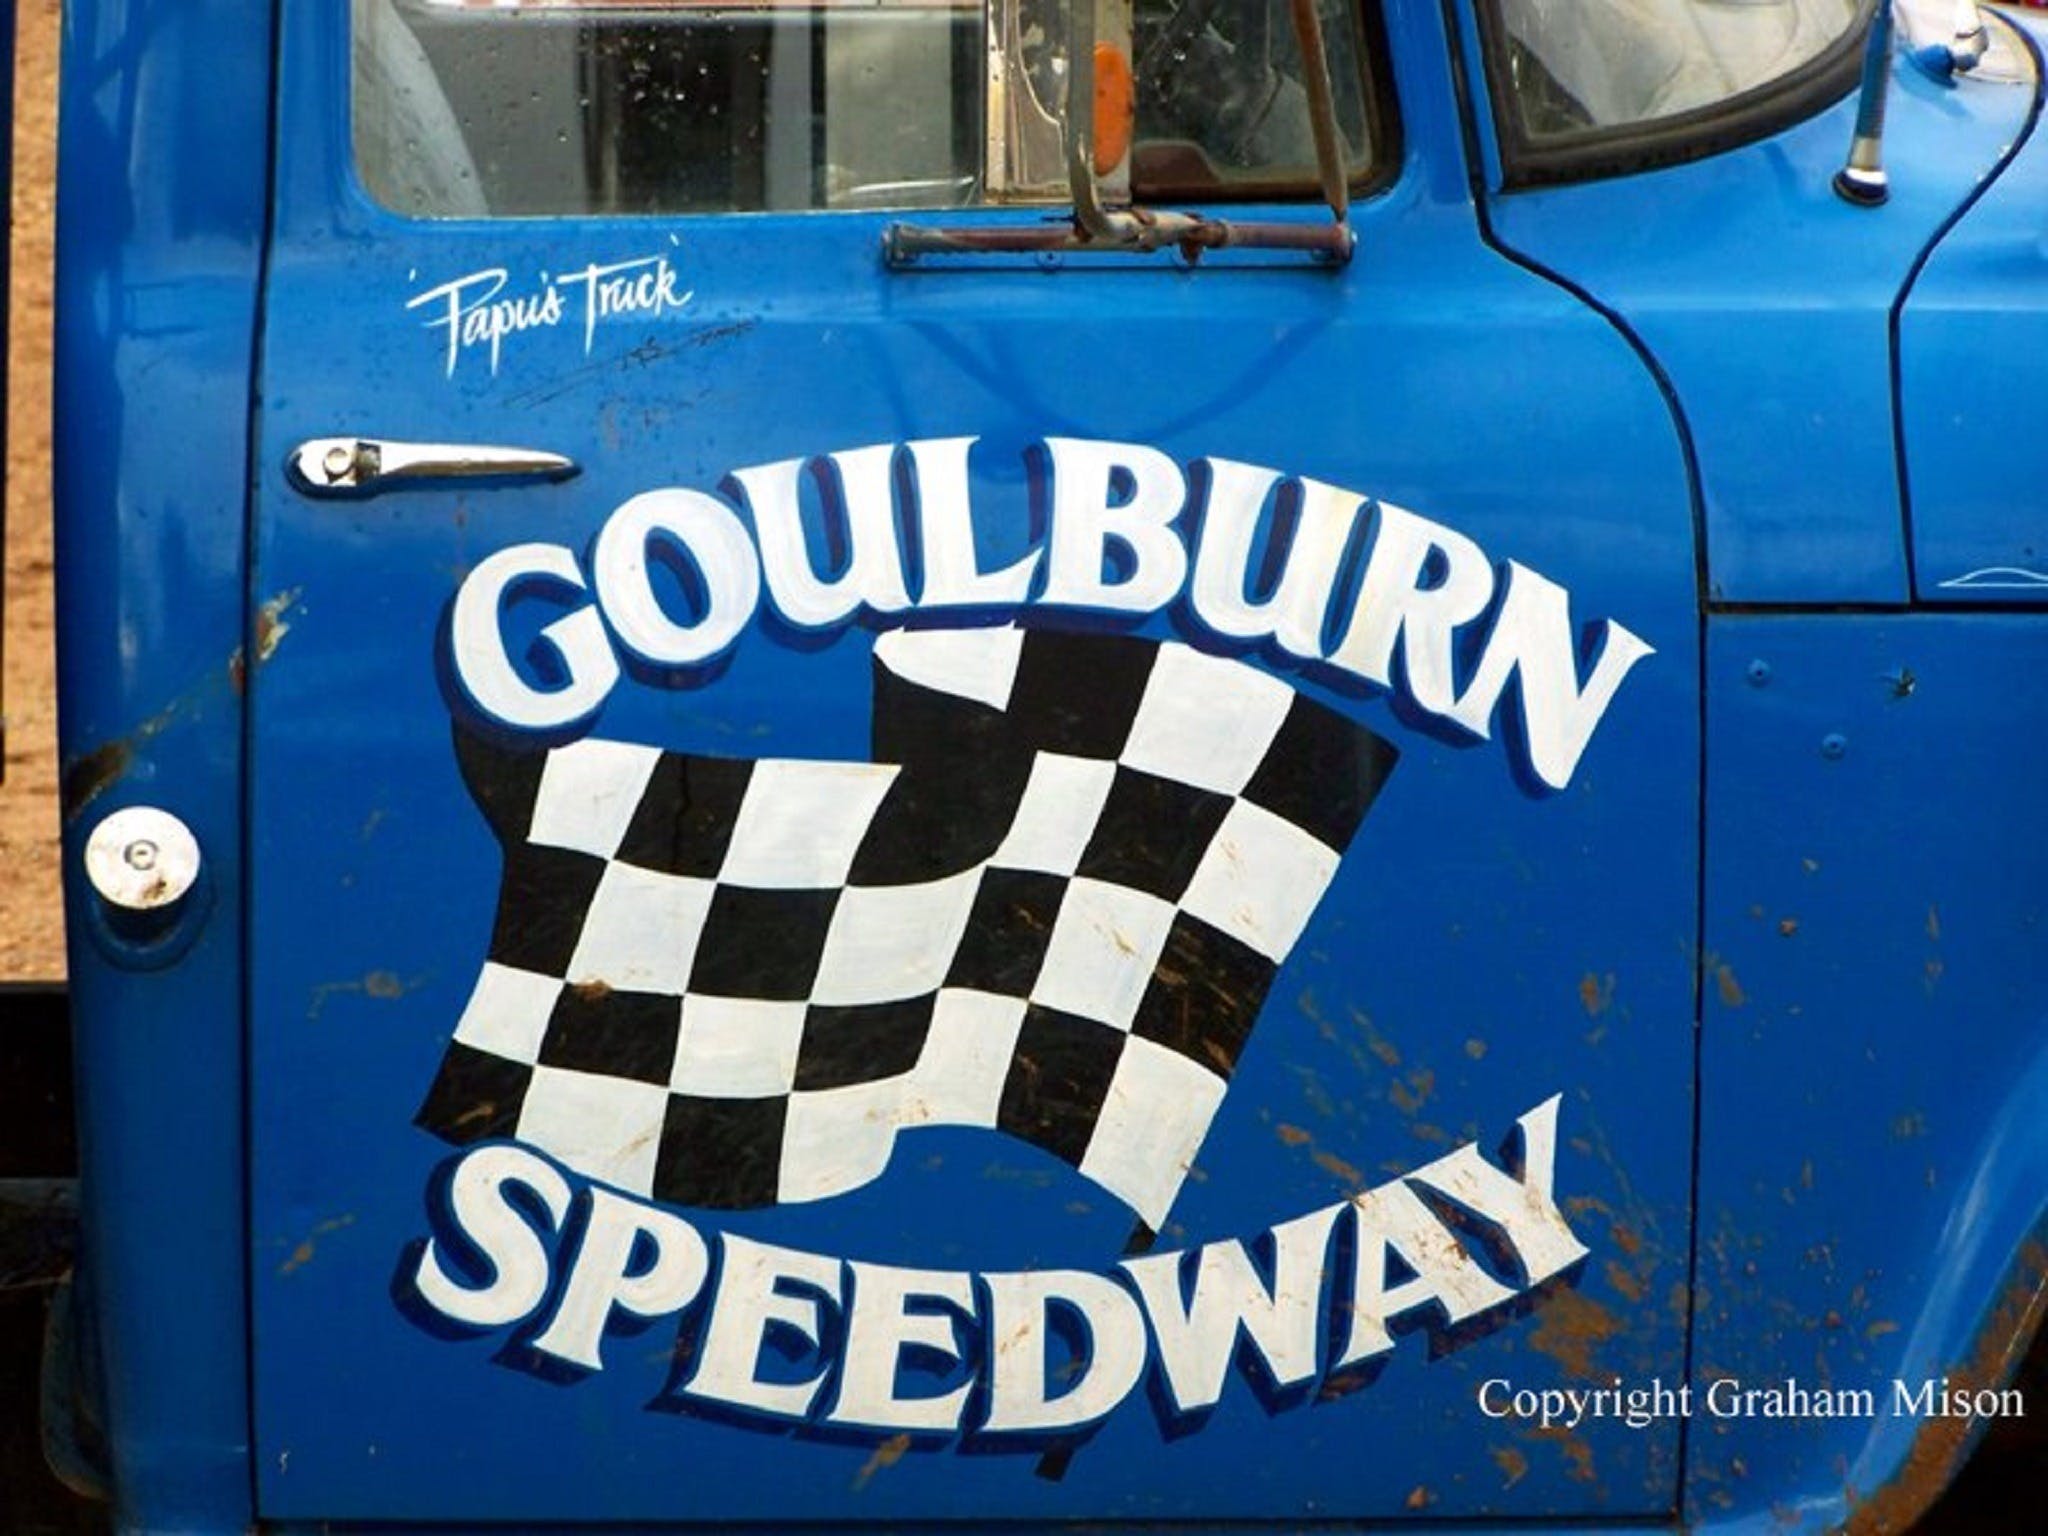 50 years of racing at Goulburn Speedway - Great Ocean Road Tourism